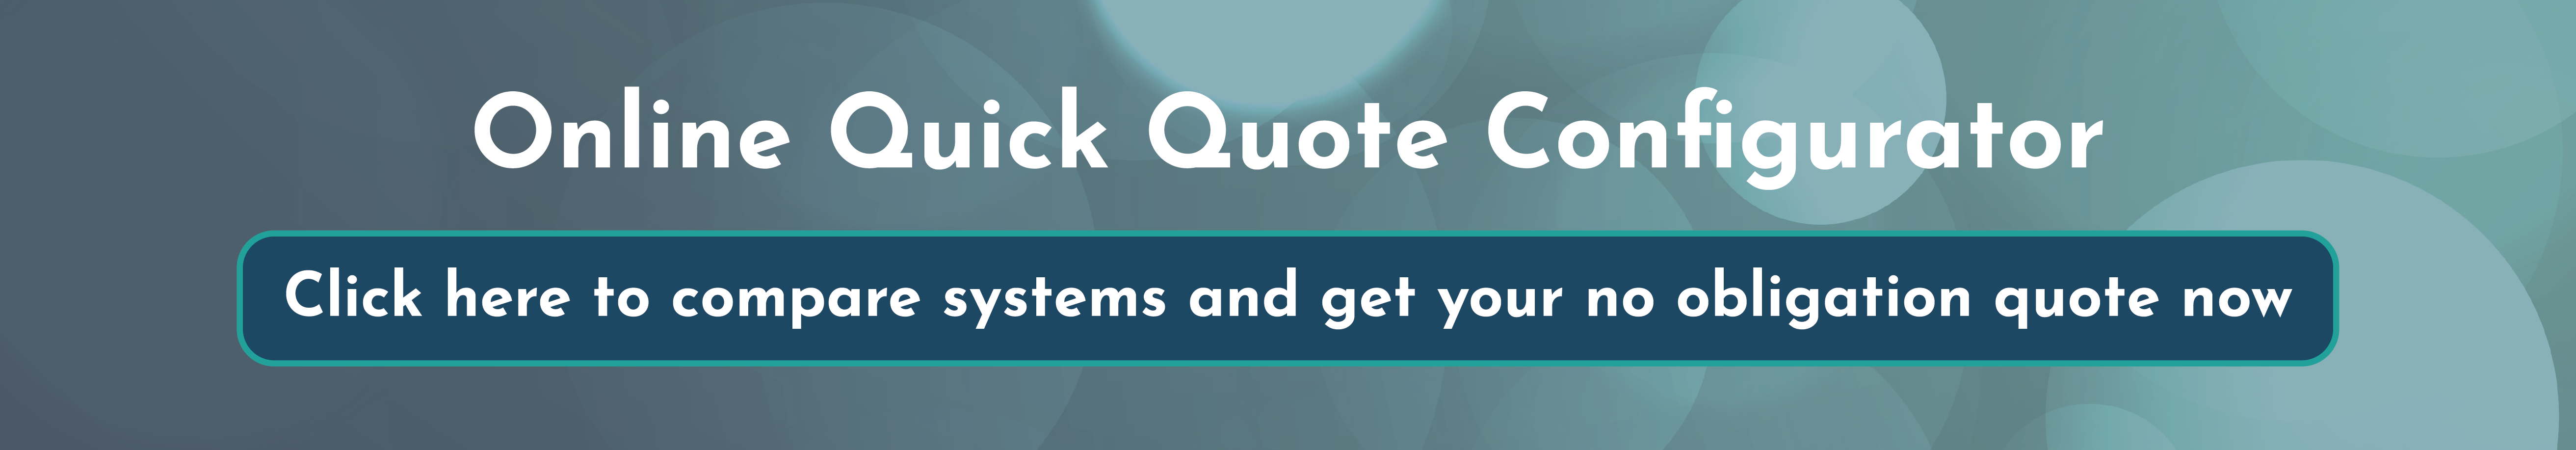 Online Quick Quote - Get your no obligation quote now